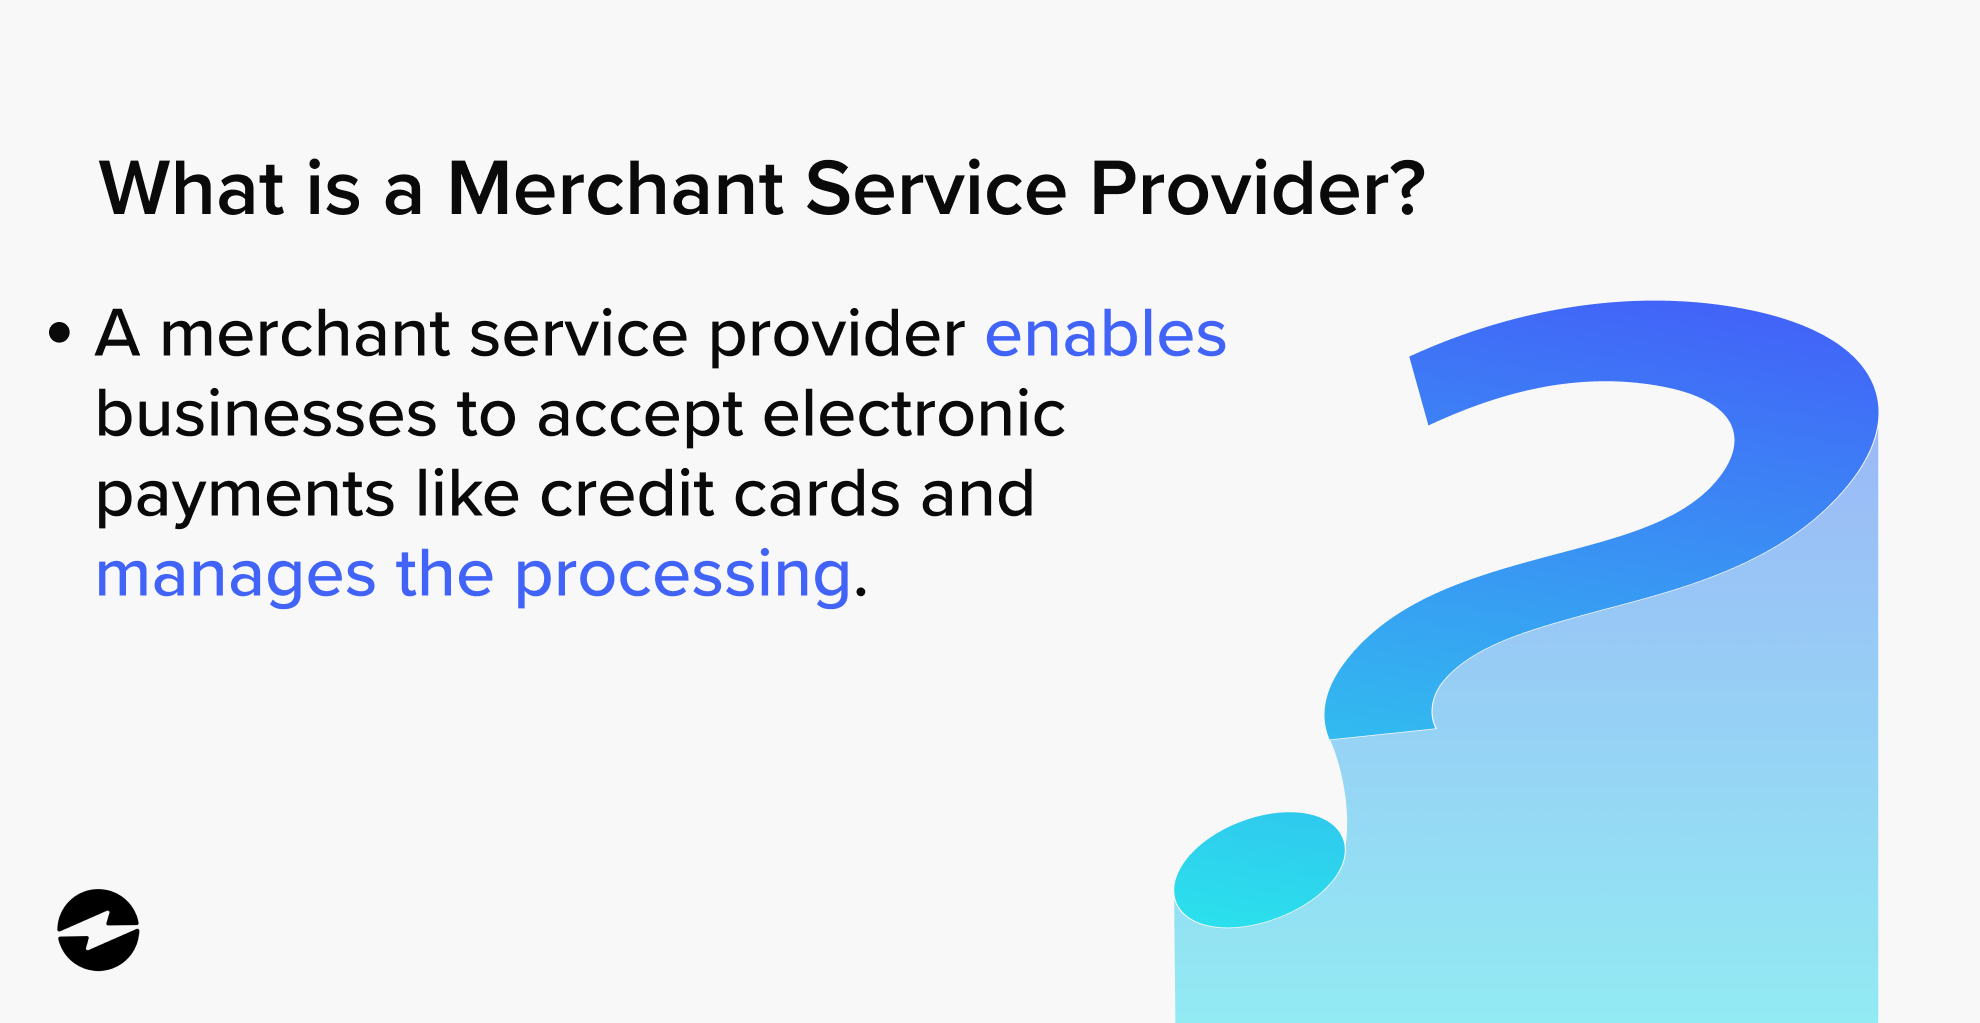 What are merchant service providers